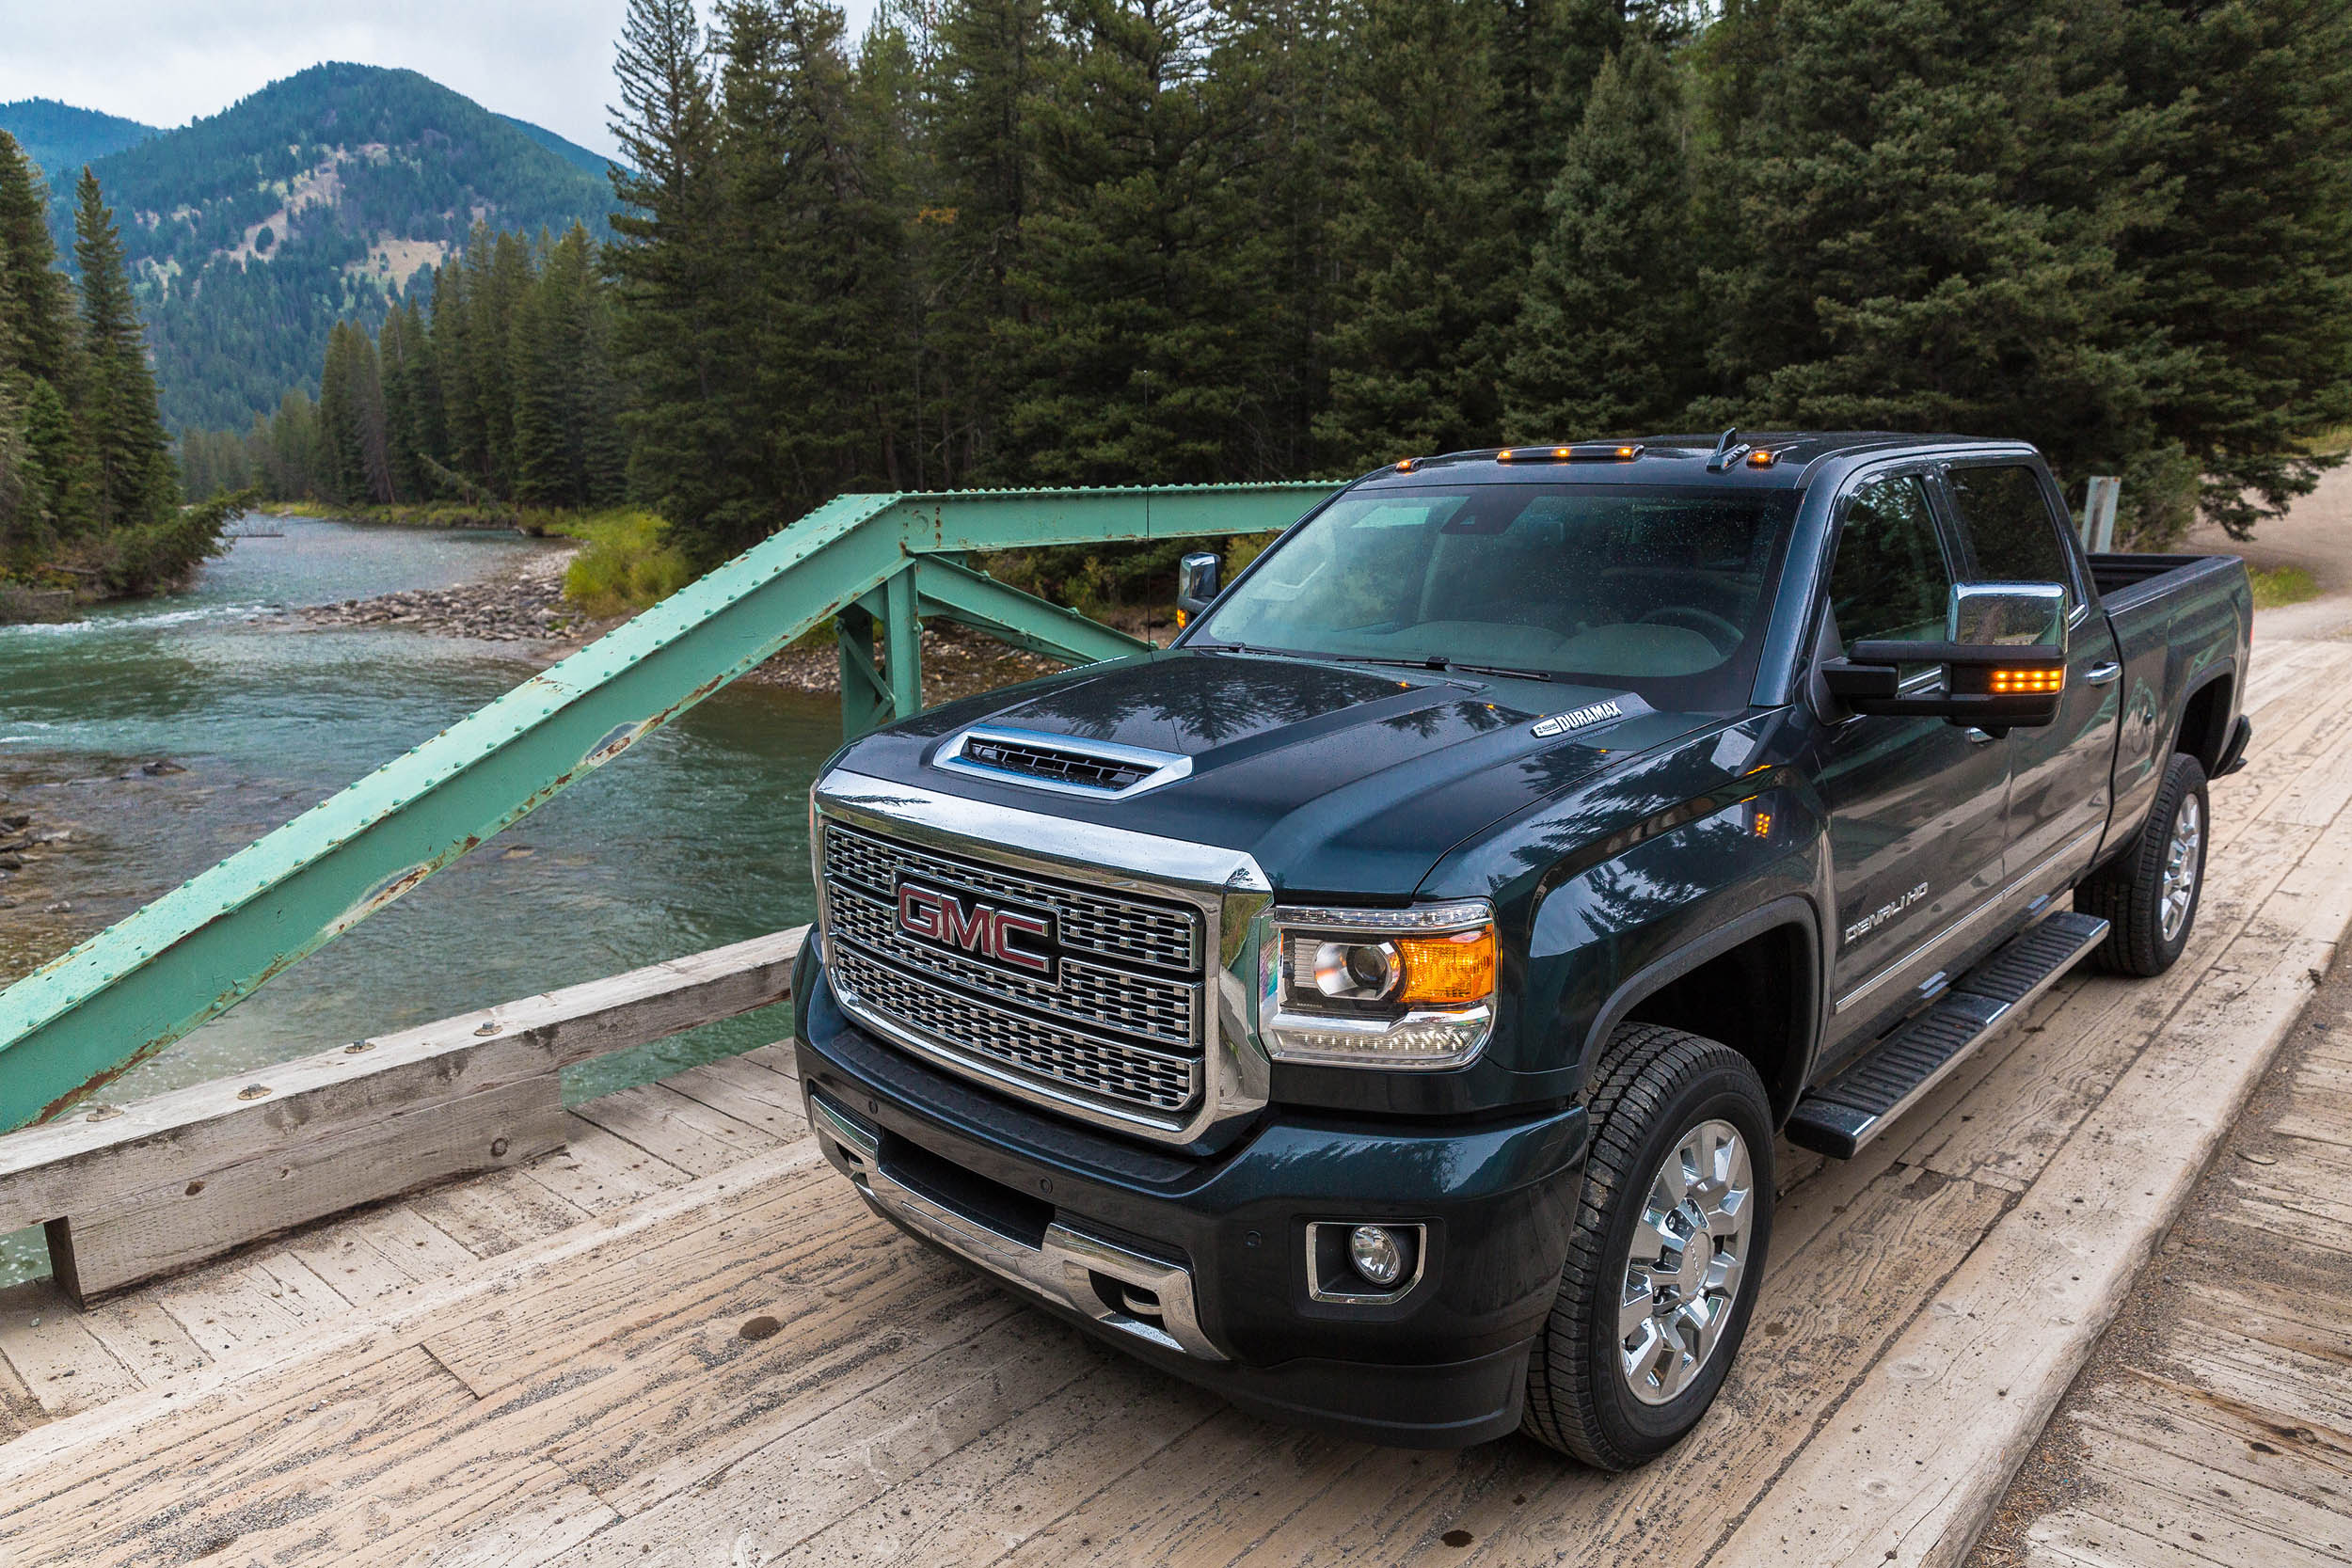 2019 Gmc Sierra 2500hd Review Ratings Specs Prices And Photos The